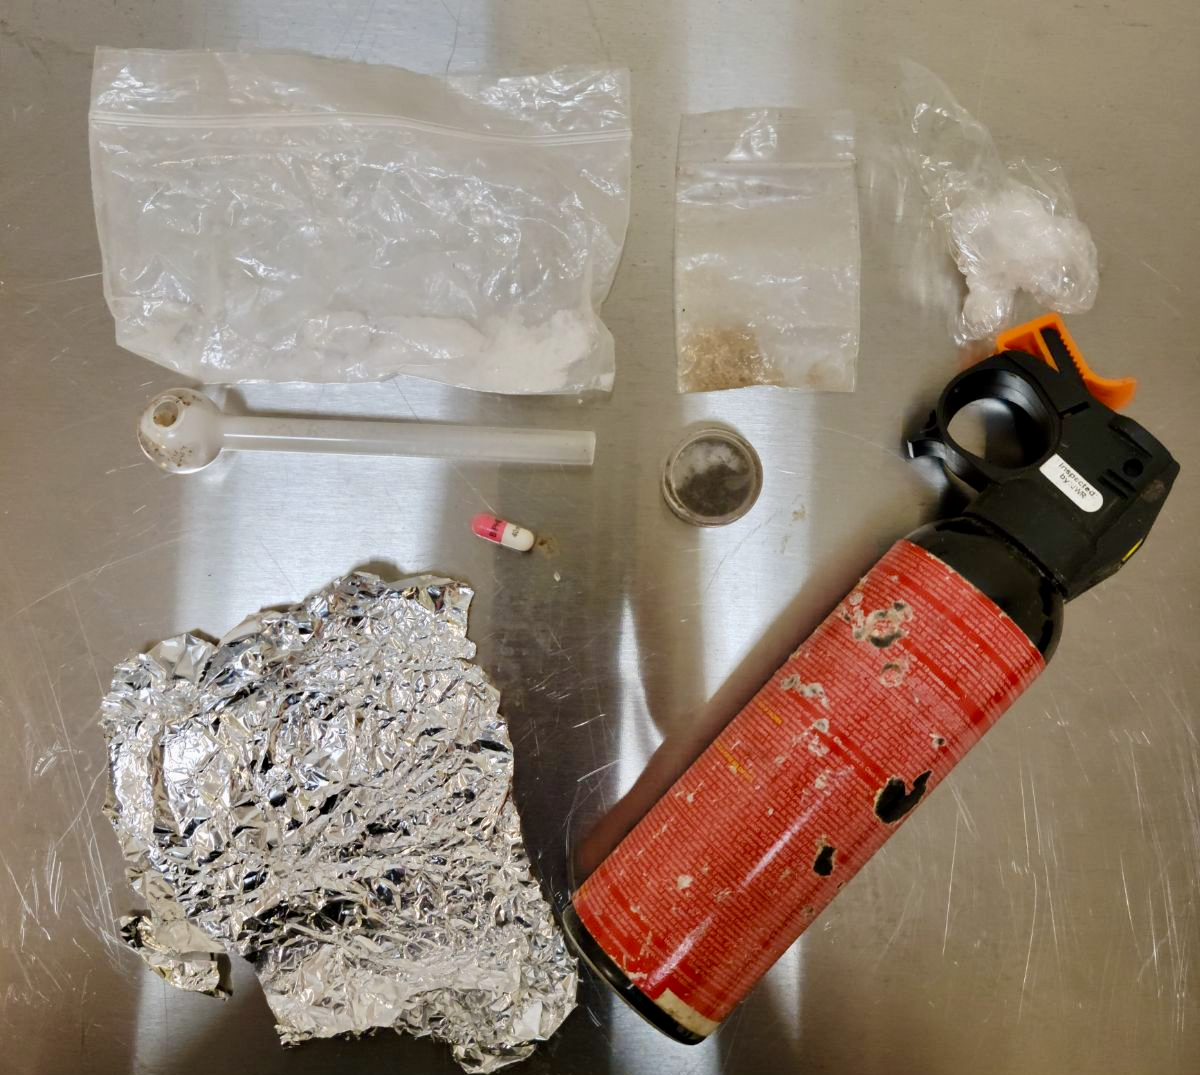 Drugs and bear spray were seized during a RIDE check conducted by City of Kawartha Lakes OPP on Sept. 18, 2023.